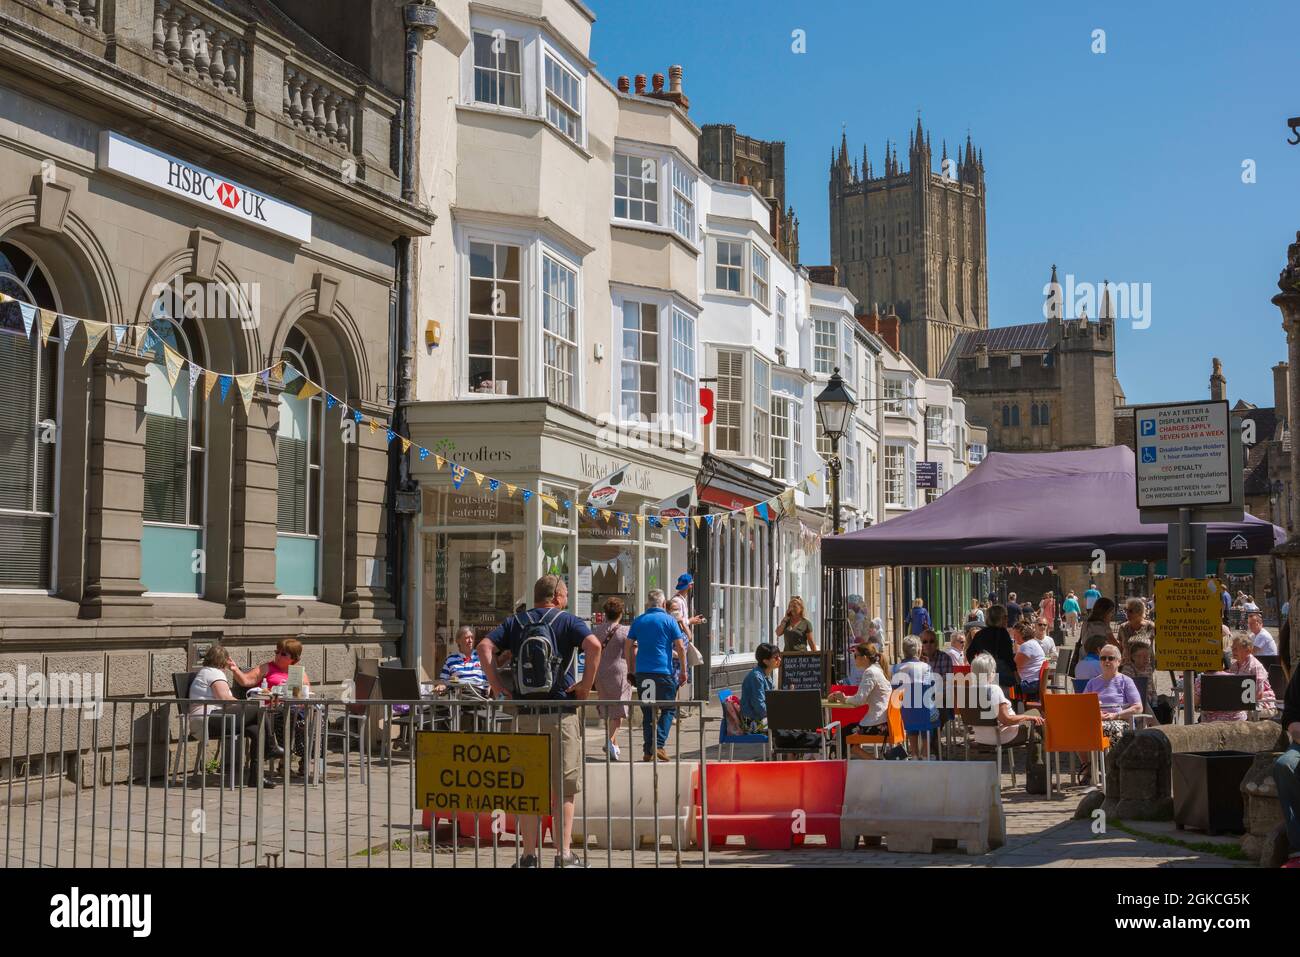 Wells UK, view in summer of people approaching Market Place from the High Street in the centre of the historic town of Wells, Somerset, England, UK Stock Photo